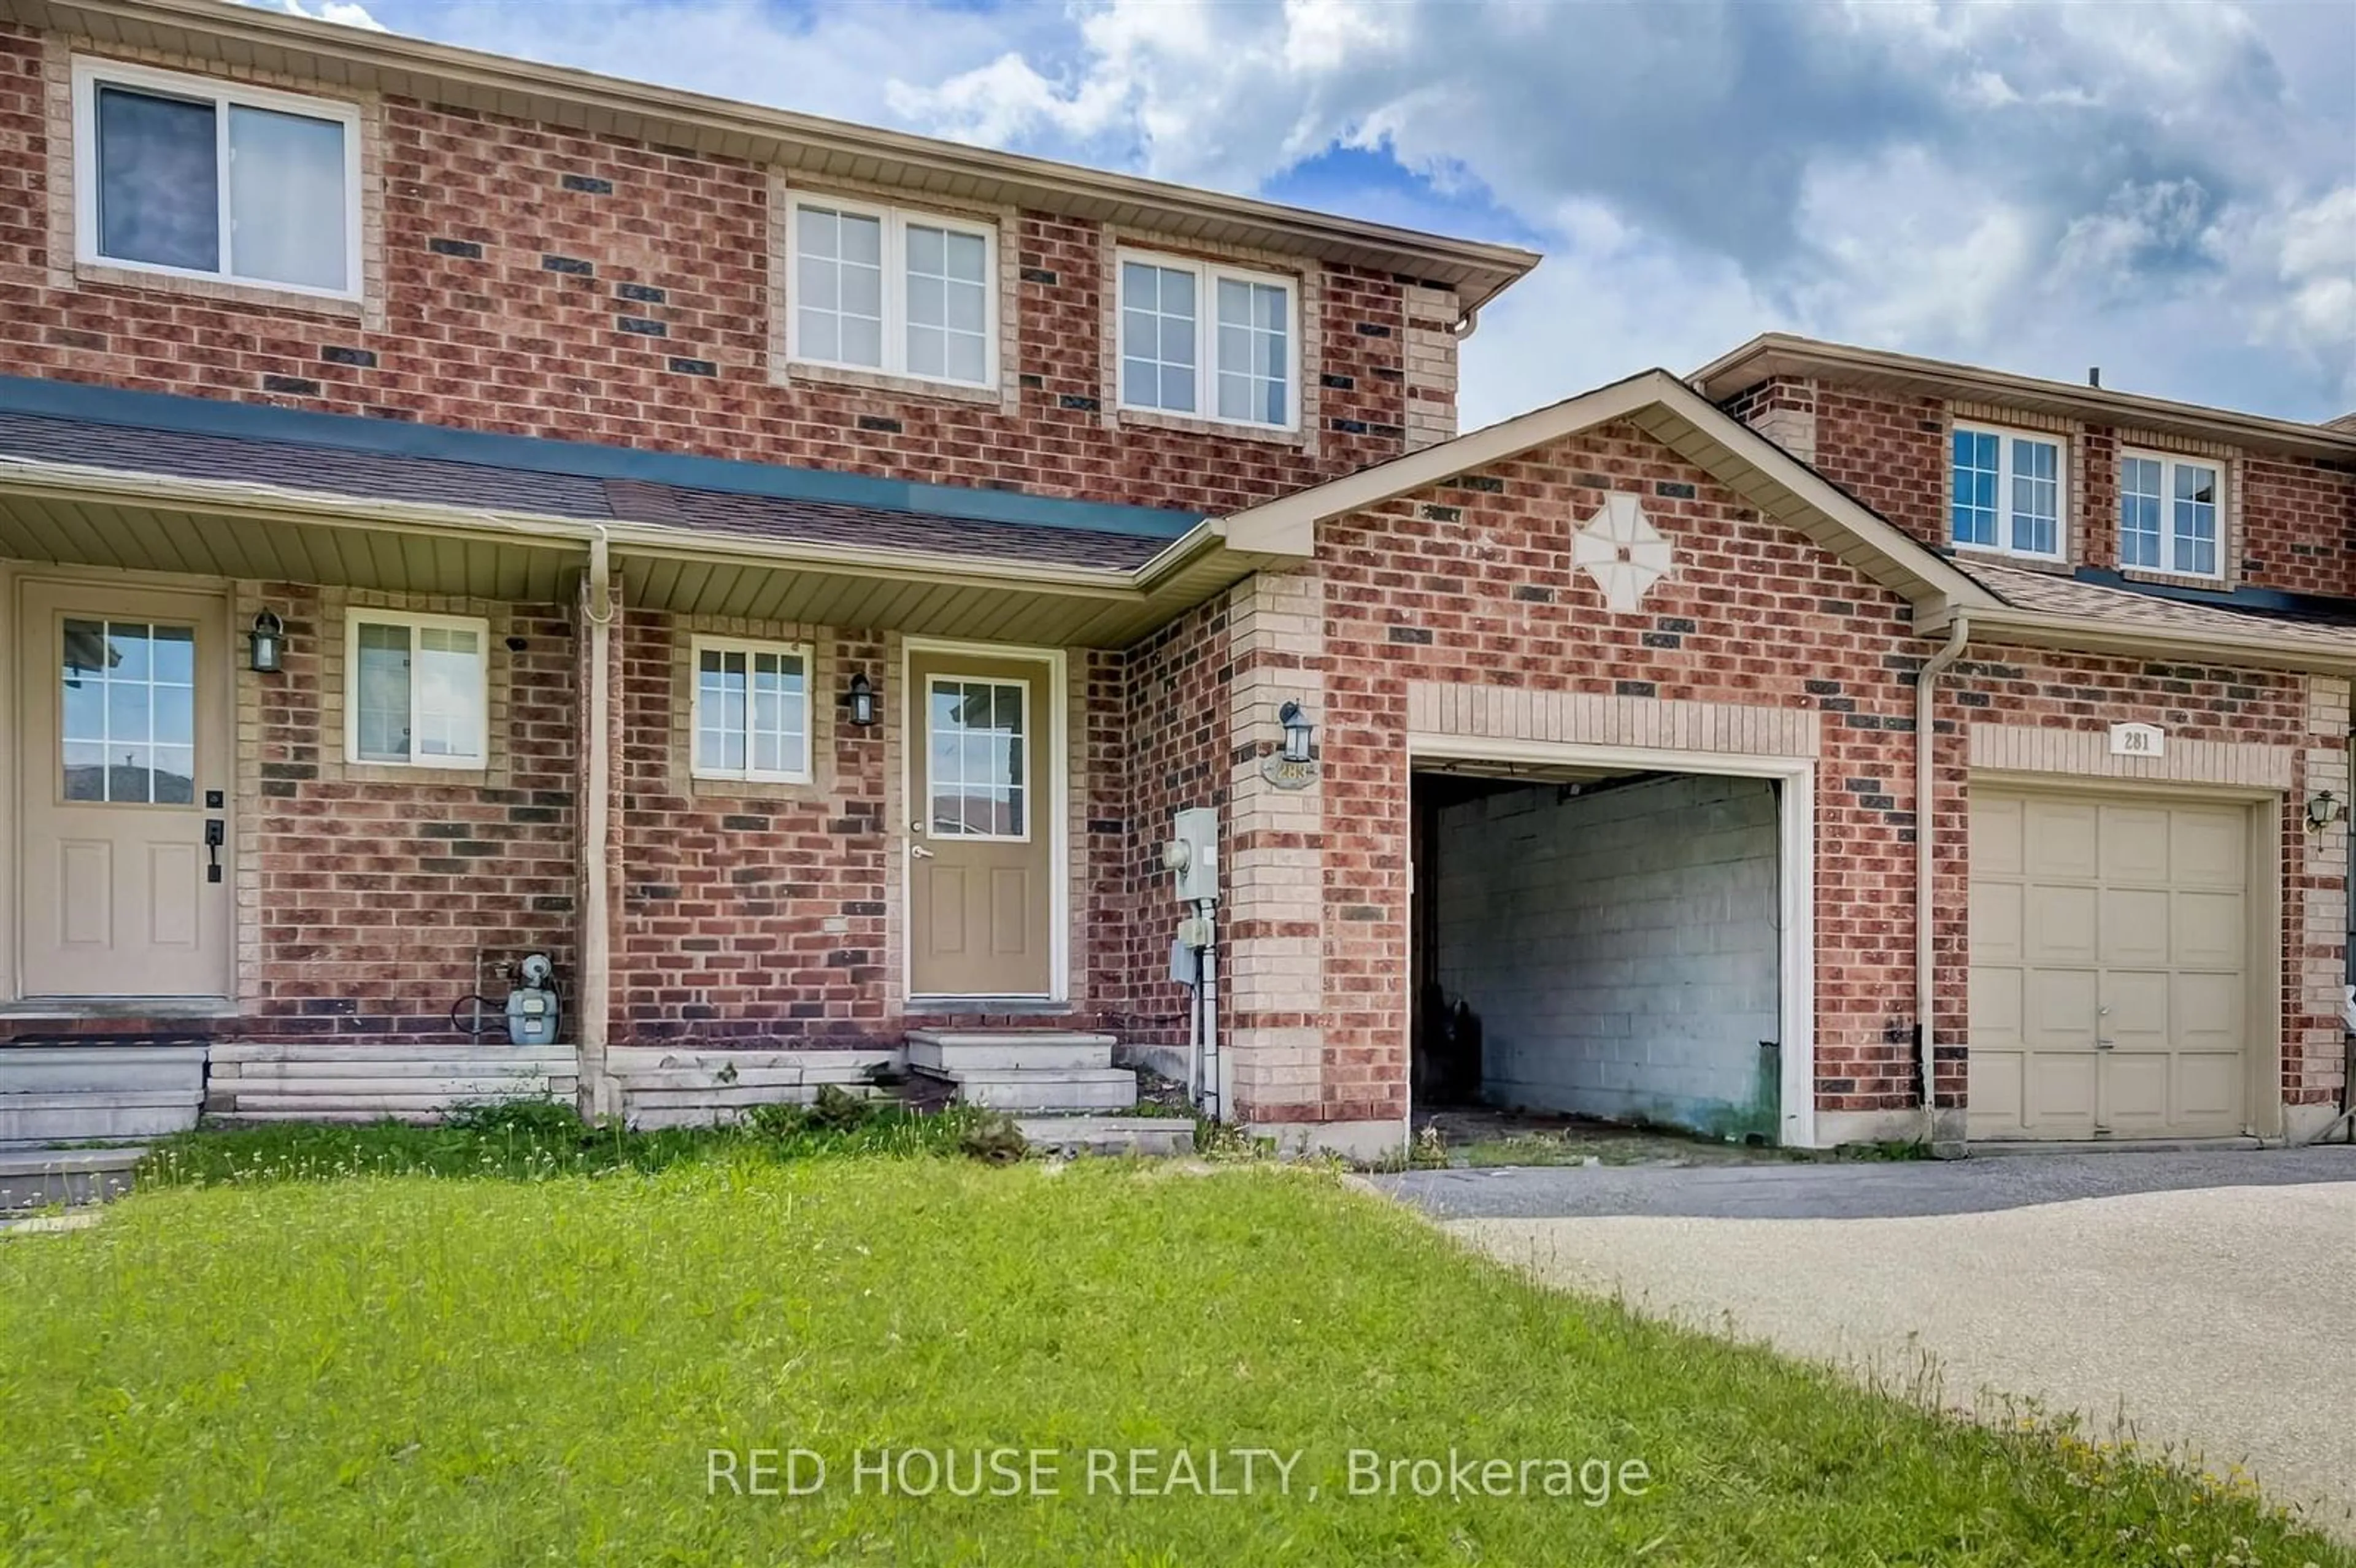 Home with brick exterior material for 283 Dunsmore Lane, Barrie Ontario L4M 7A7